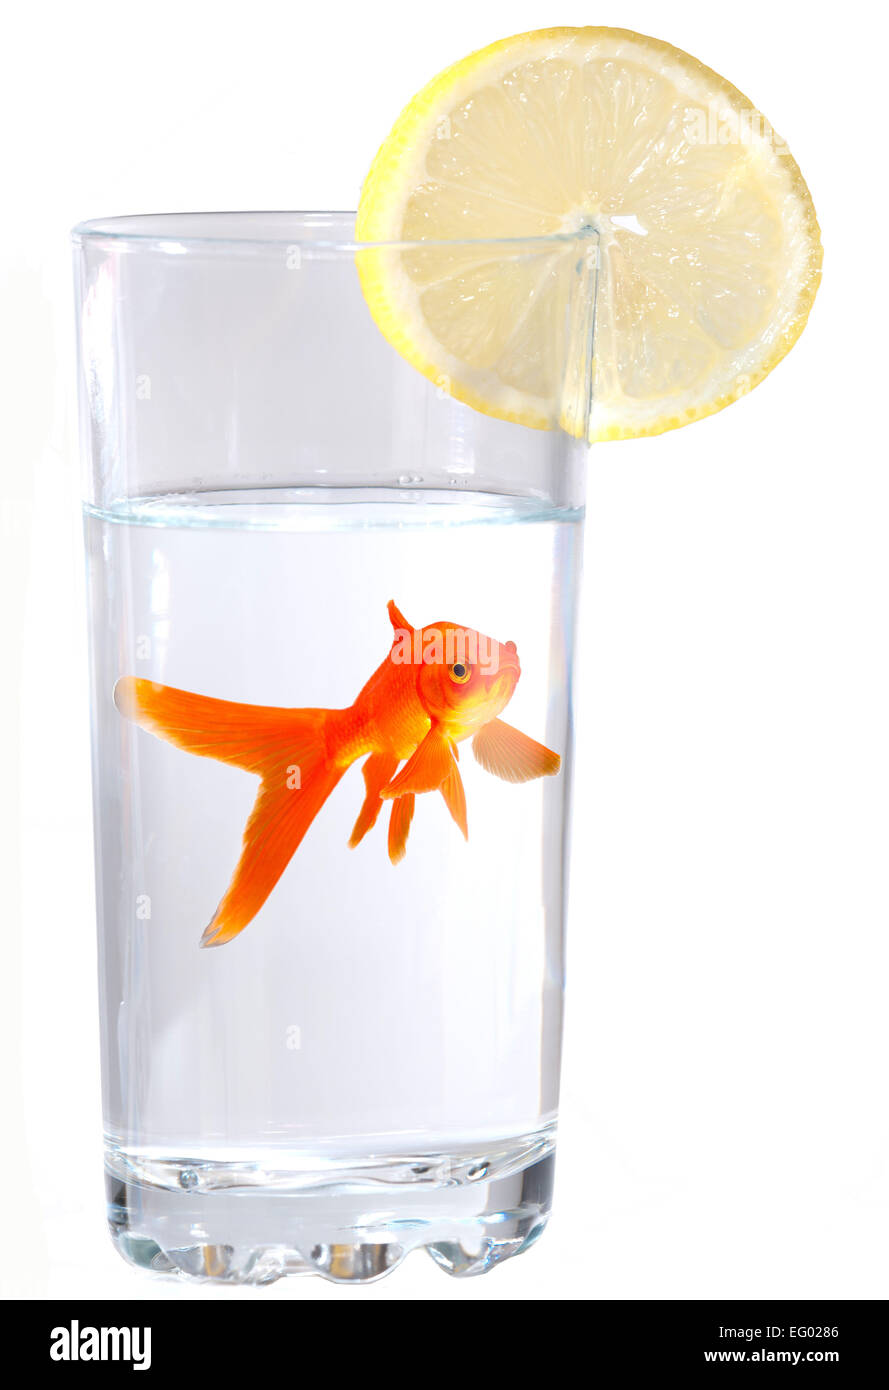 Goldfish swimming in drinking glass on white background Stock Photo